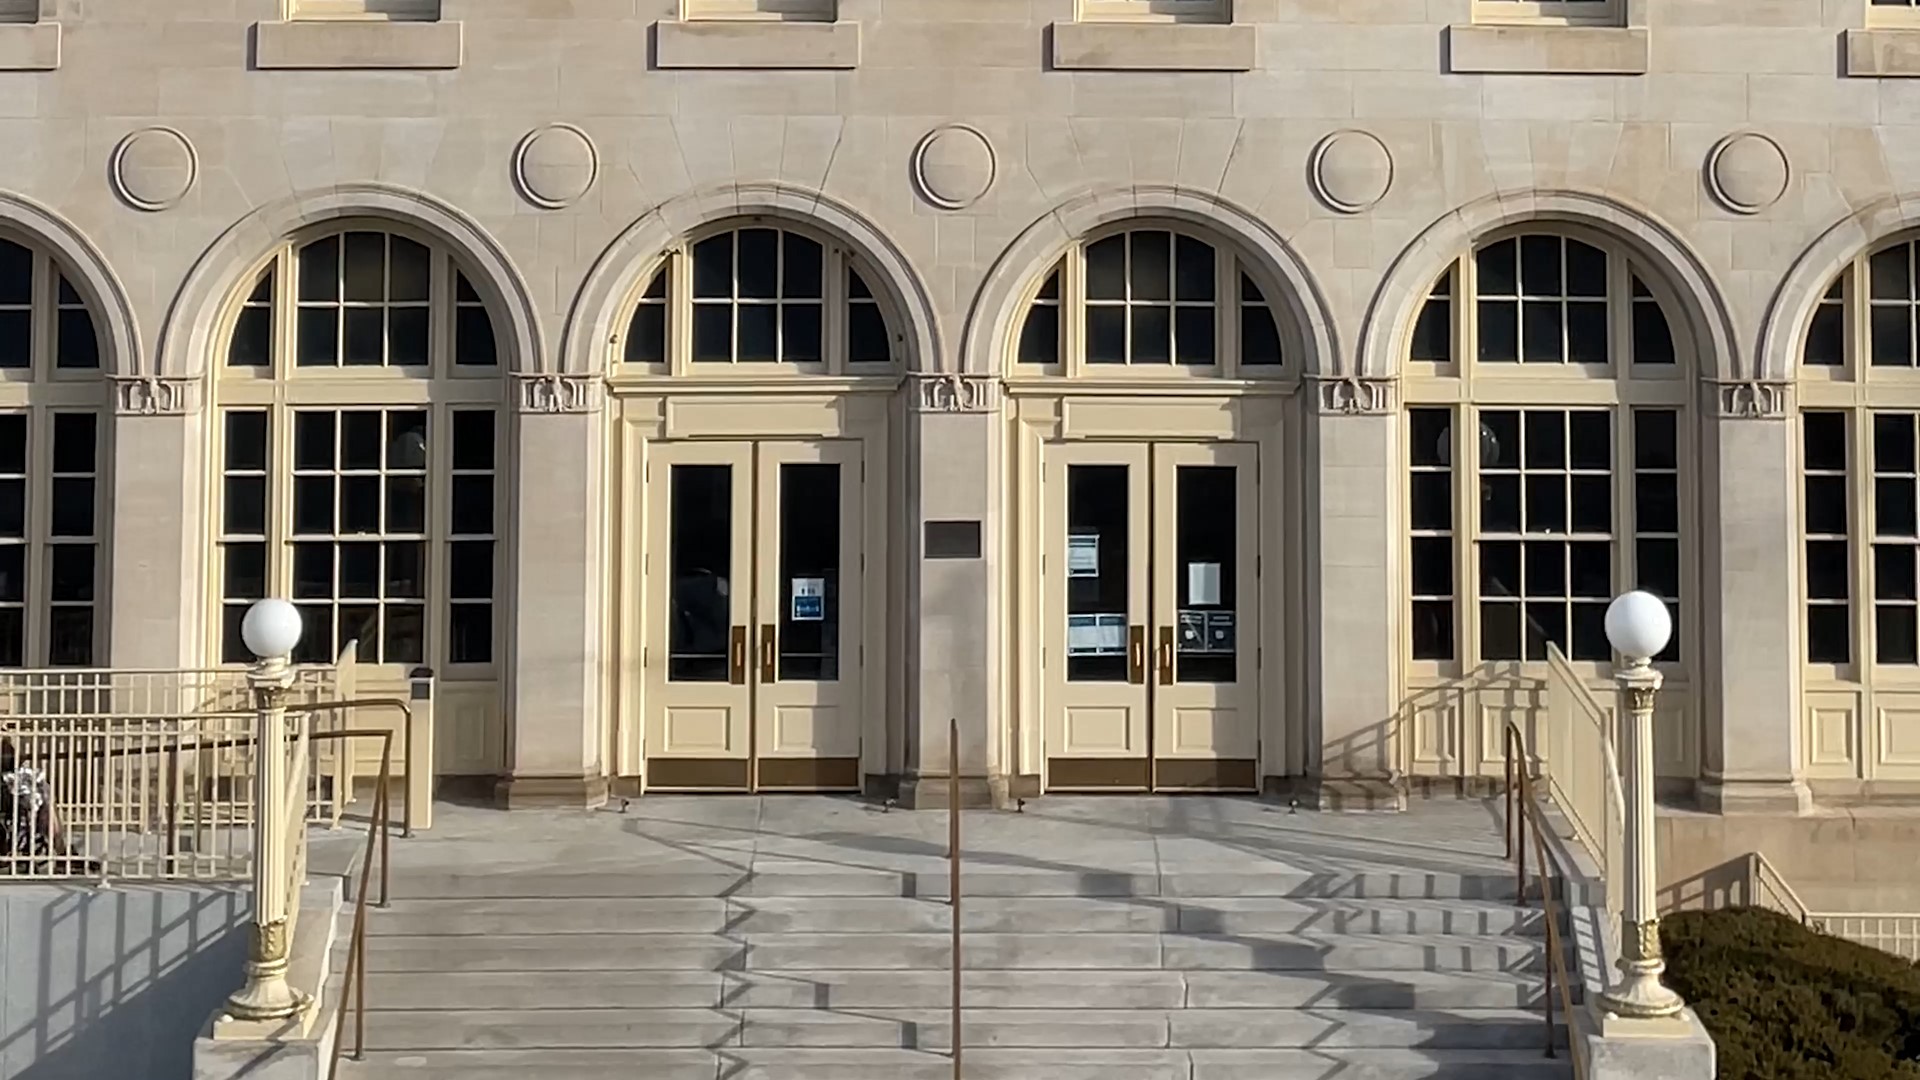 Front doors of a federal building, showing classical design with stone arches and steps leading up to the doors